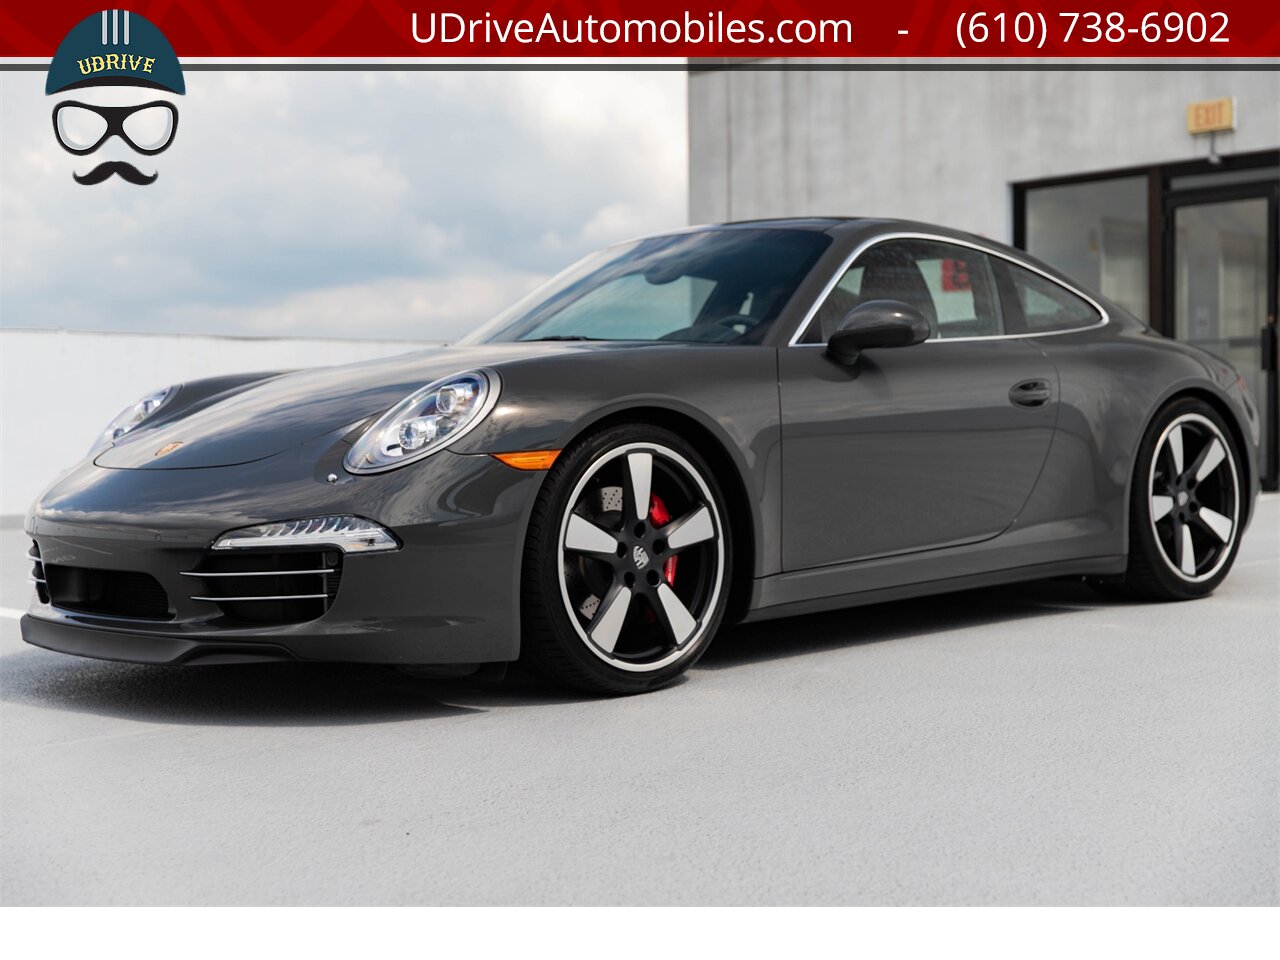 2014 Porsche 911 Carrera S 50th Anniversary Edition Certified  CPO Warranty thru 12/26/21 Full Front End Clear Film - Photo 8 - West Chester, PA 19382